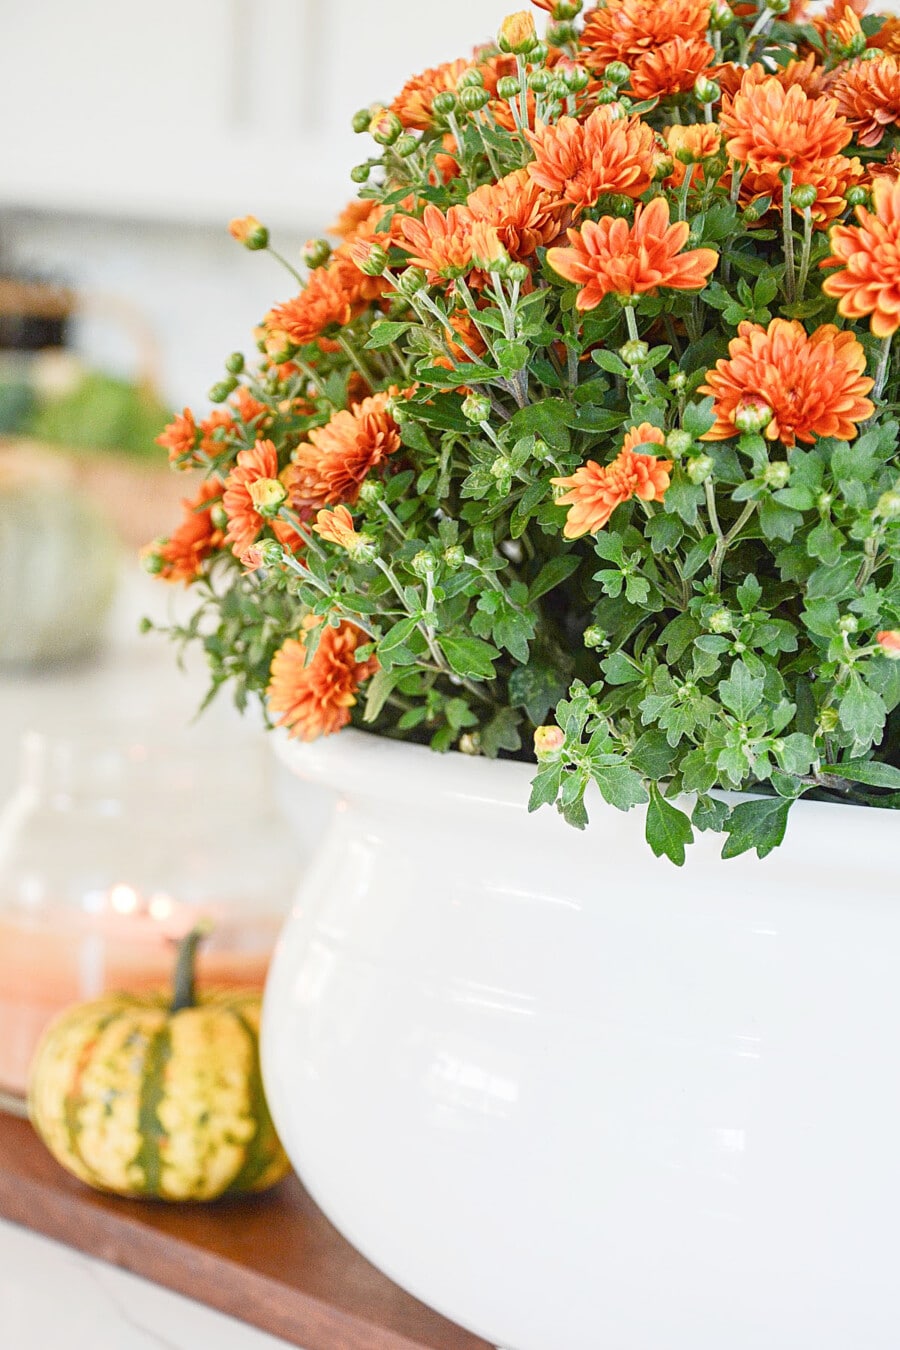 Caring For Indoor Mums and Other Fall Decorating Ideas